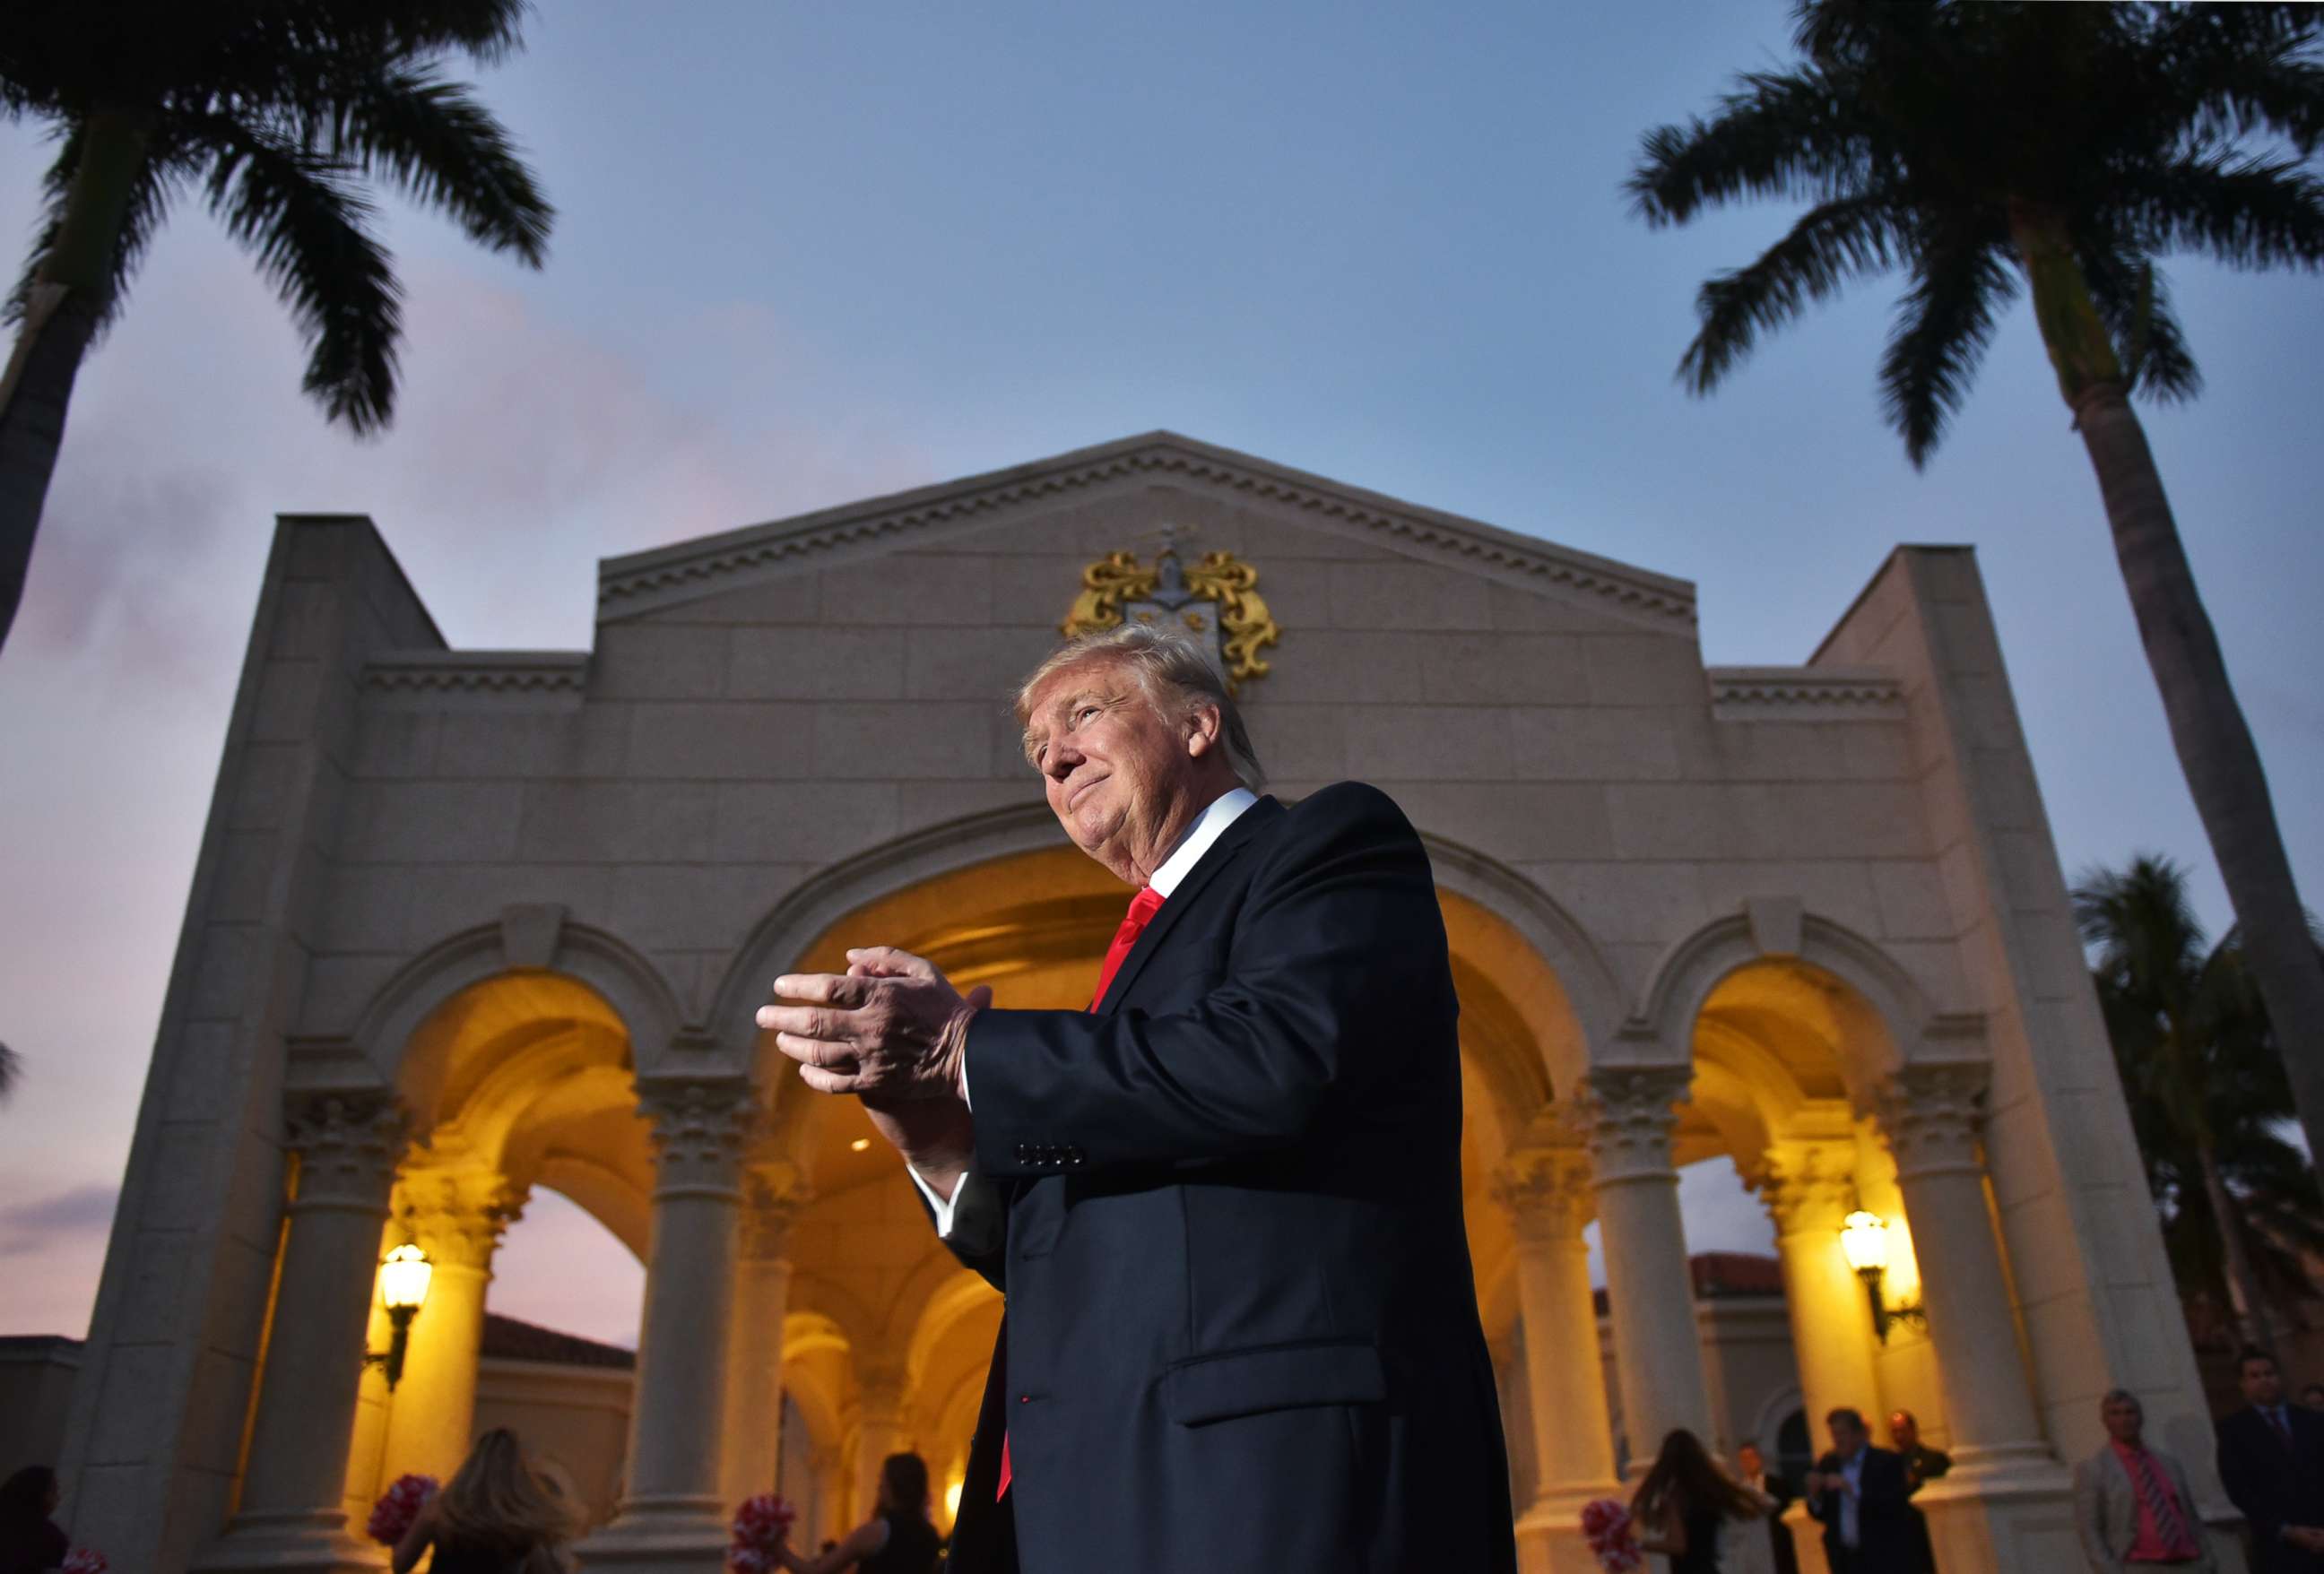 PHOTO: President Donald Trump watches the Palm Beach Central High School marching band perform as it greets him upon his arrival to watch the Super Bowl at Trump International Golf Club Palm Beach in West Palm Beach, Fla., Feb. 5, 2017.